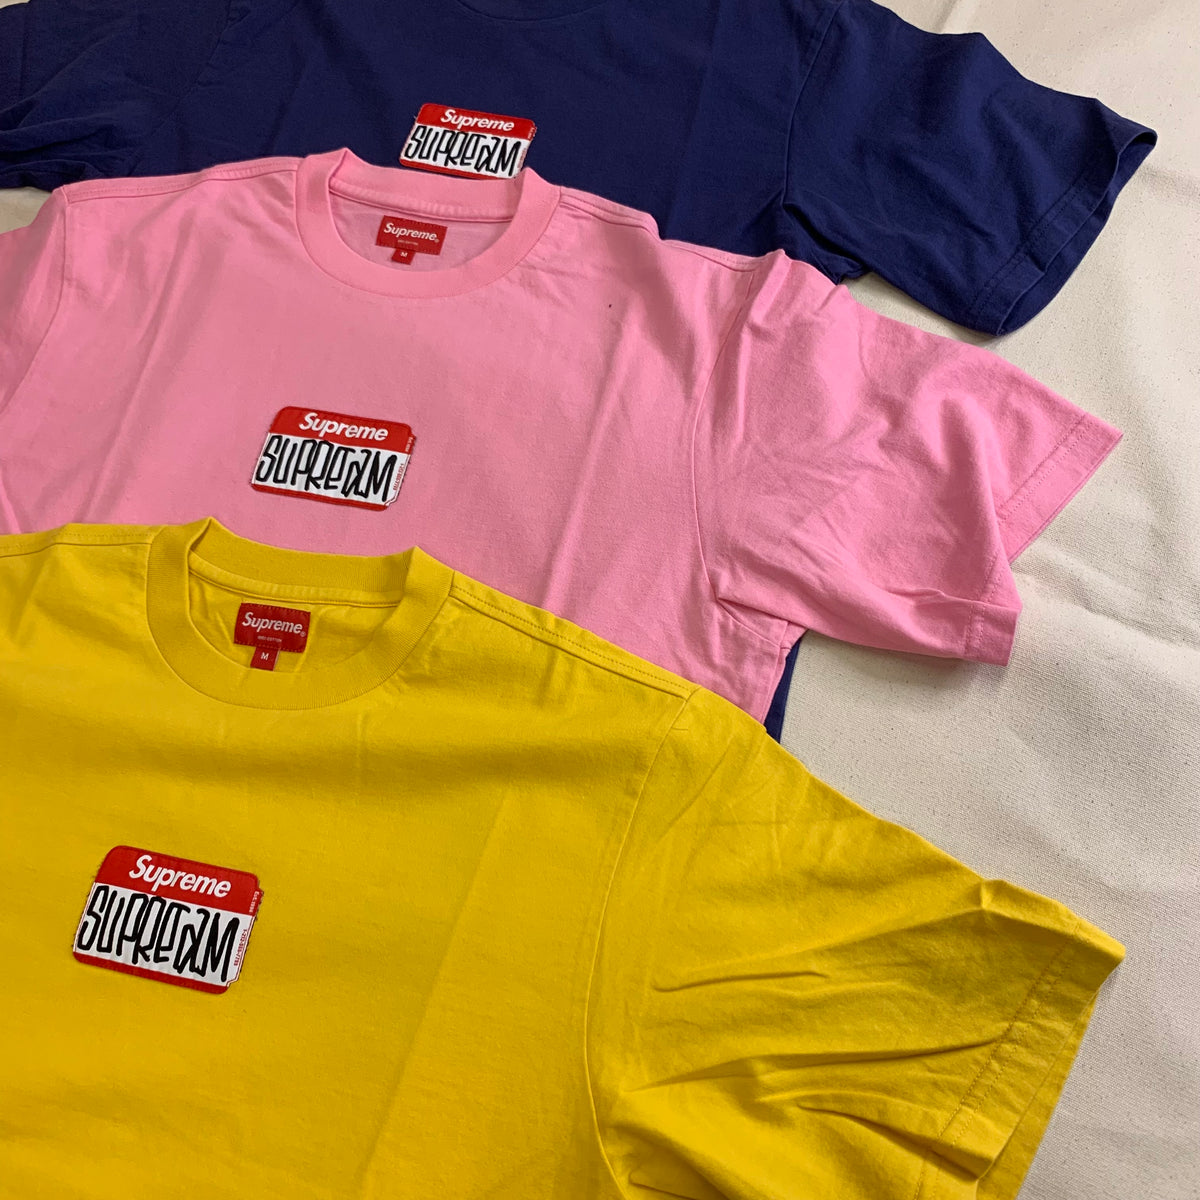 L Supreme Gonz Nametag S/S Top Tee Tシャツ